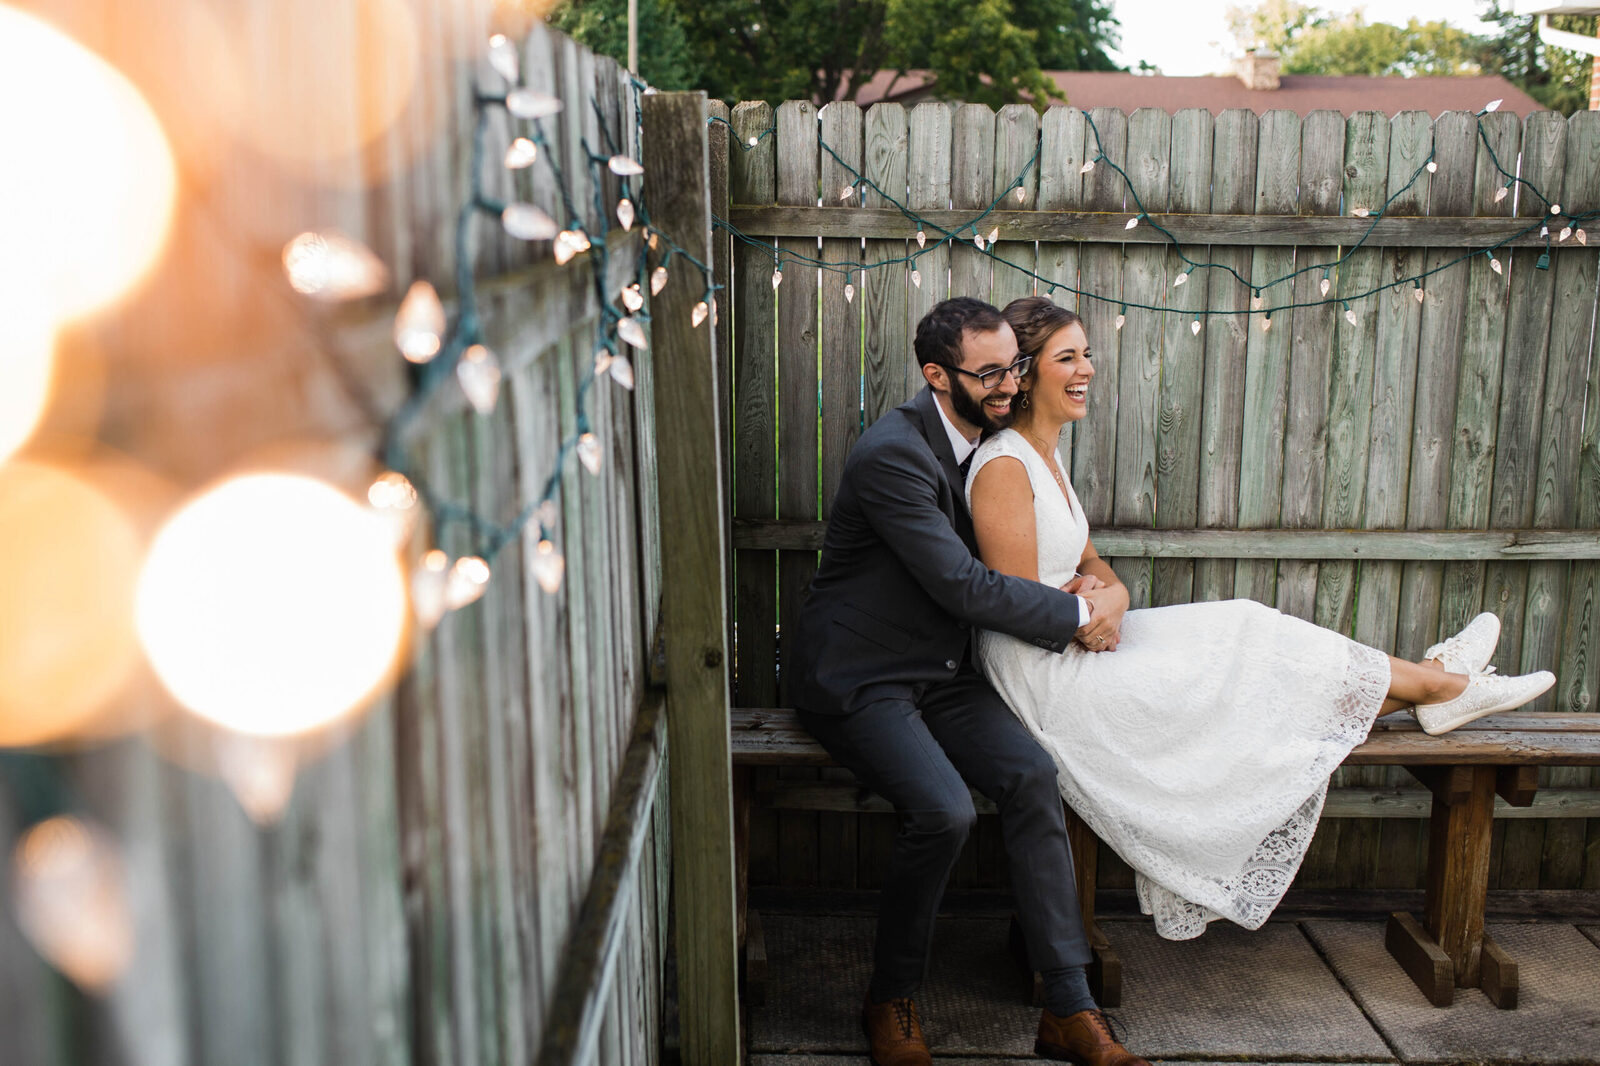 couple laughing by fence at their wedding reception